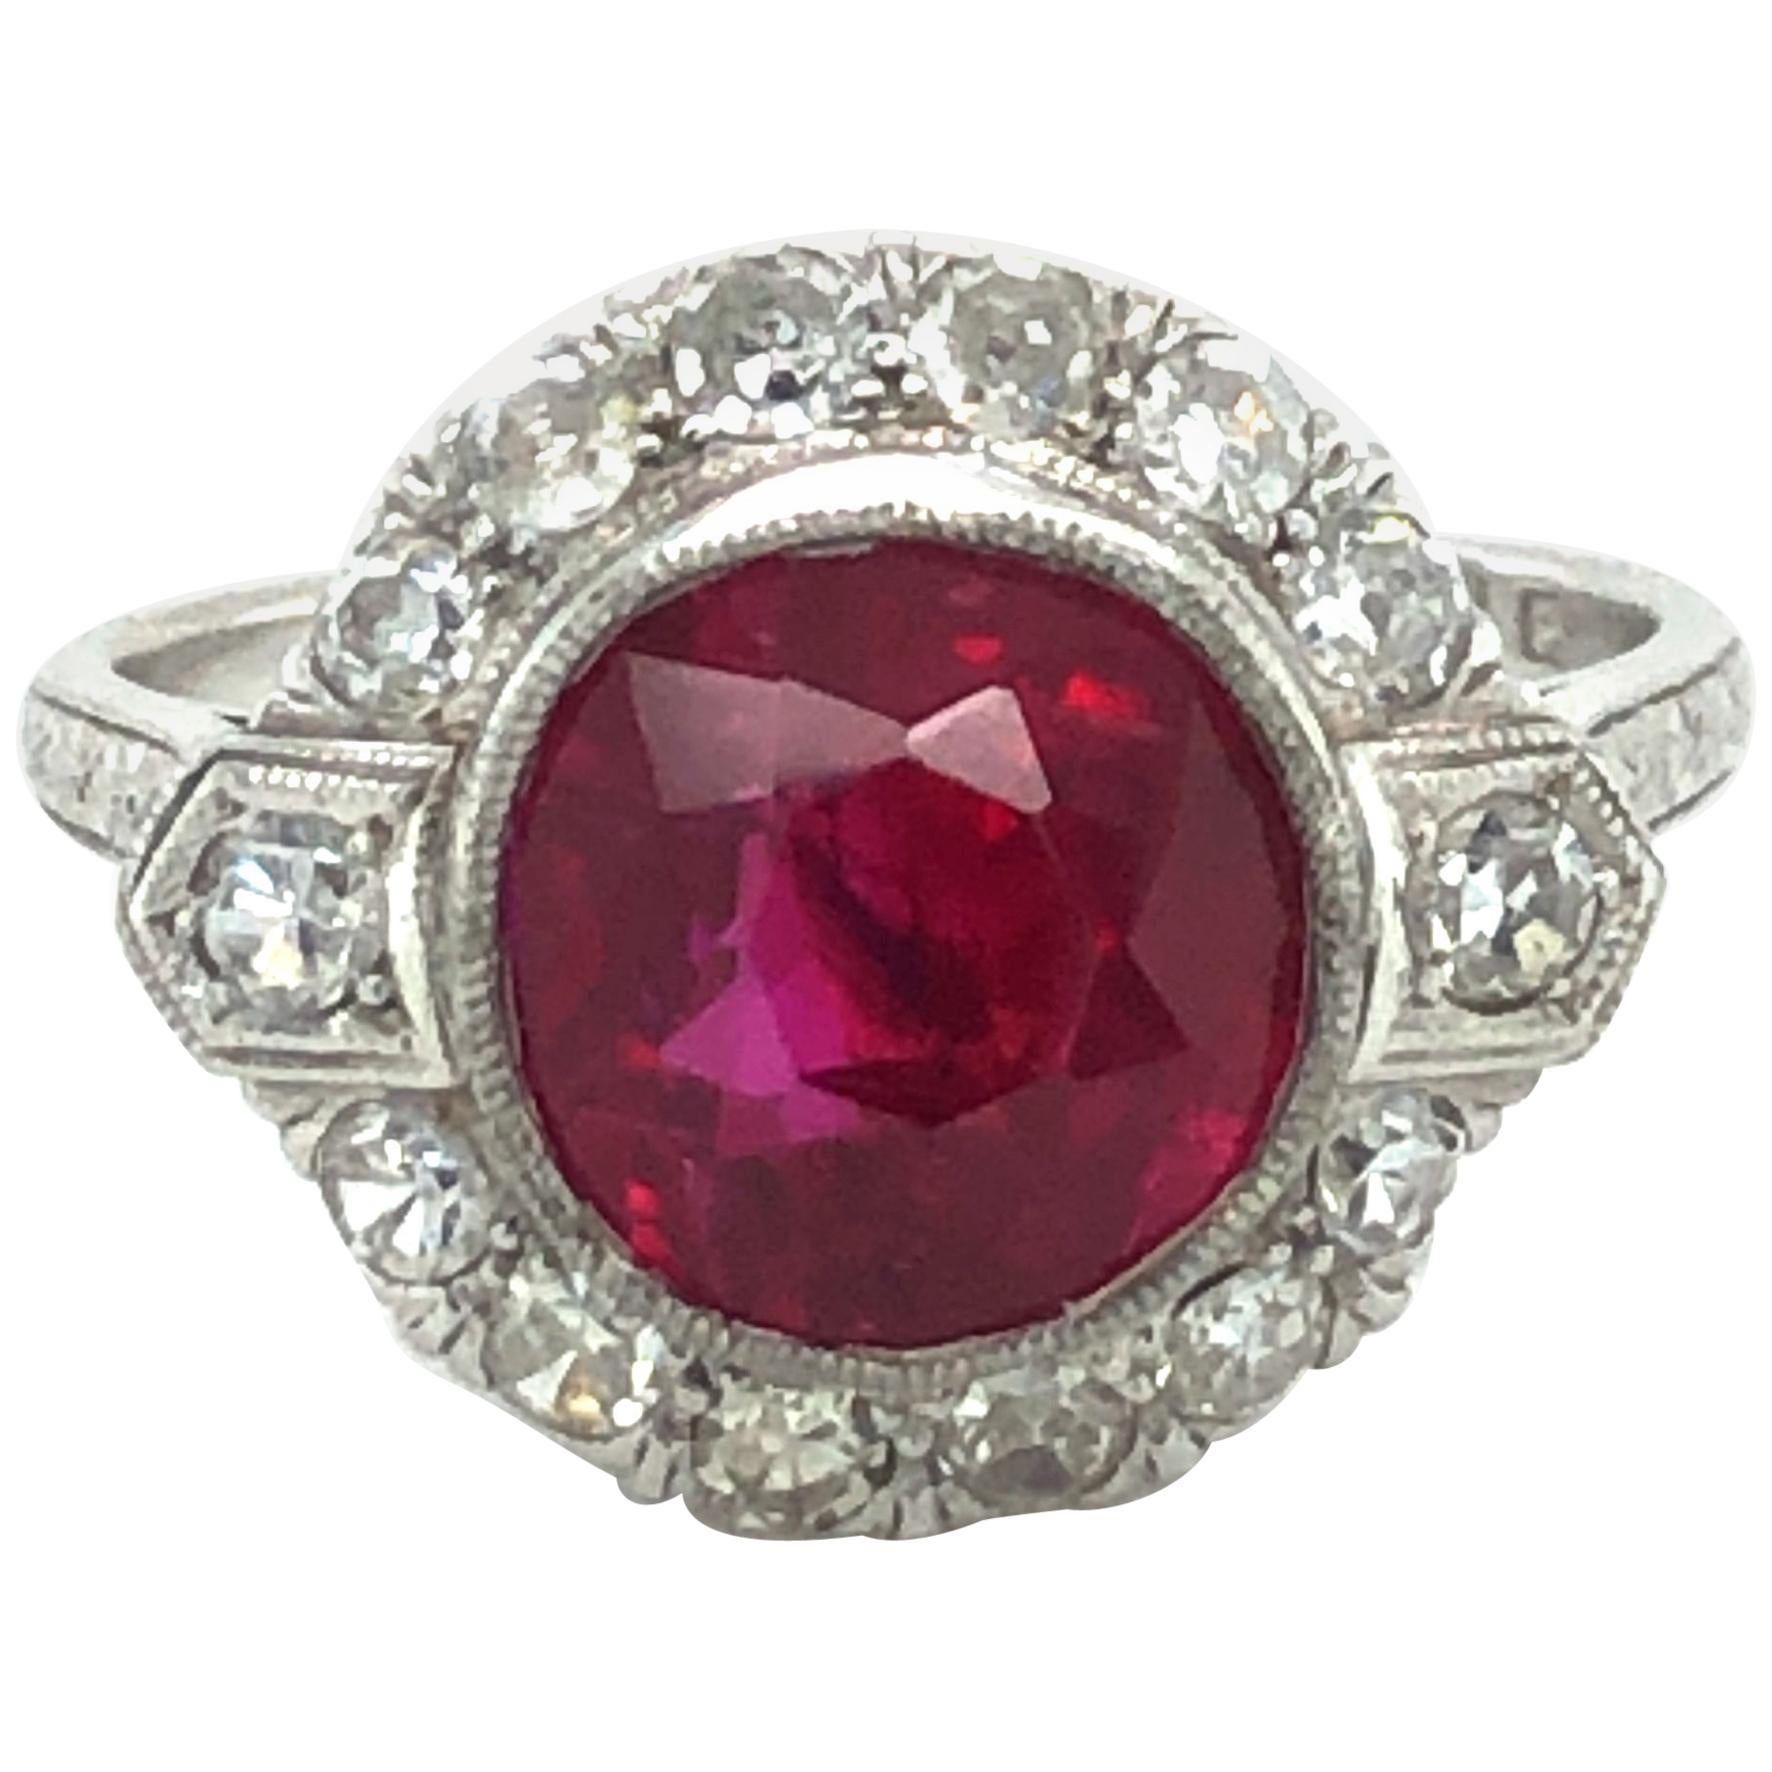 Fabulous Art Deco Ring with Burmese Ruby and Diamonds in Platinum 950 ...